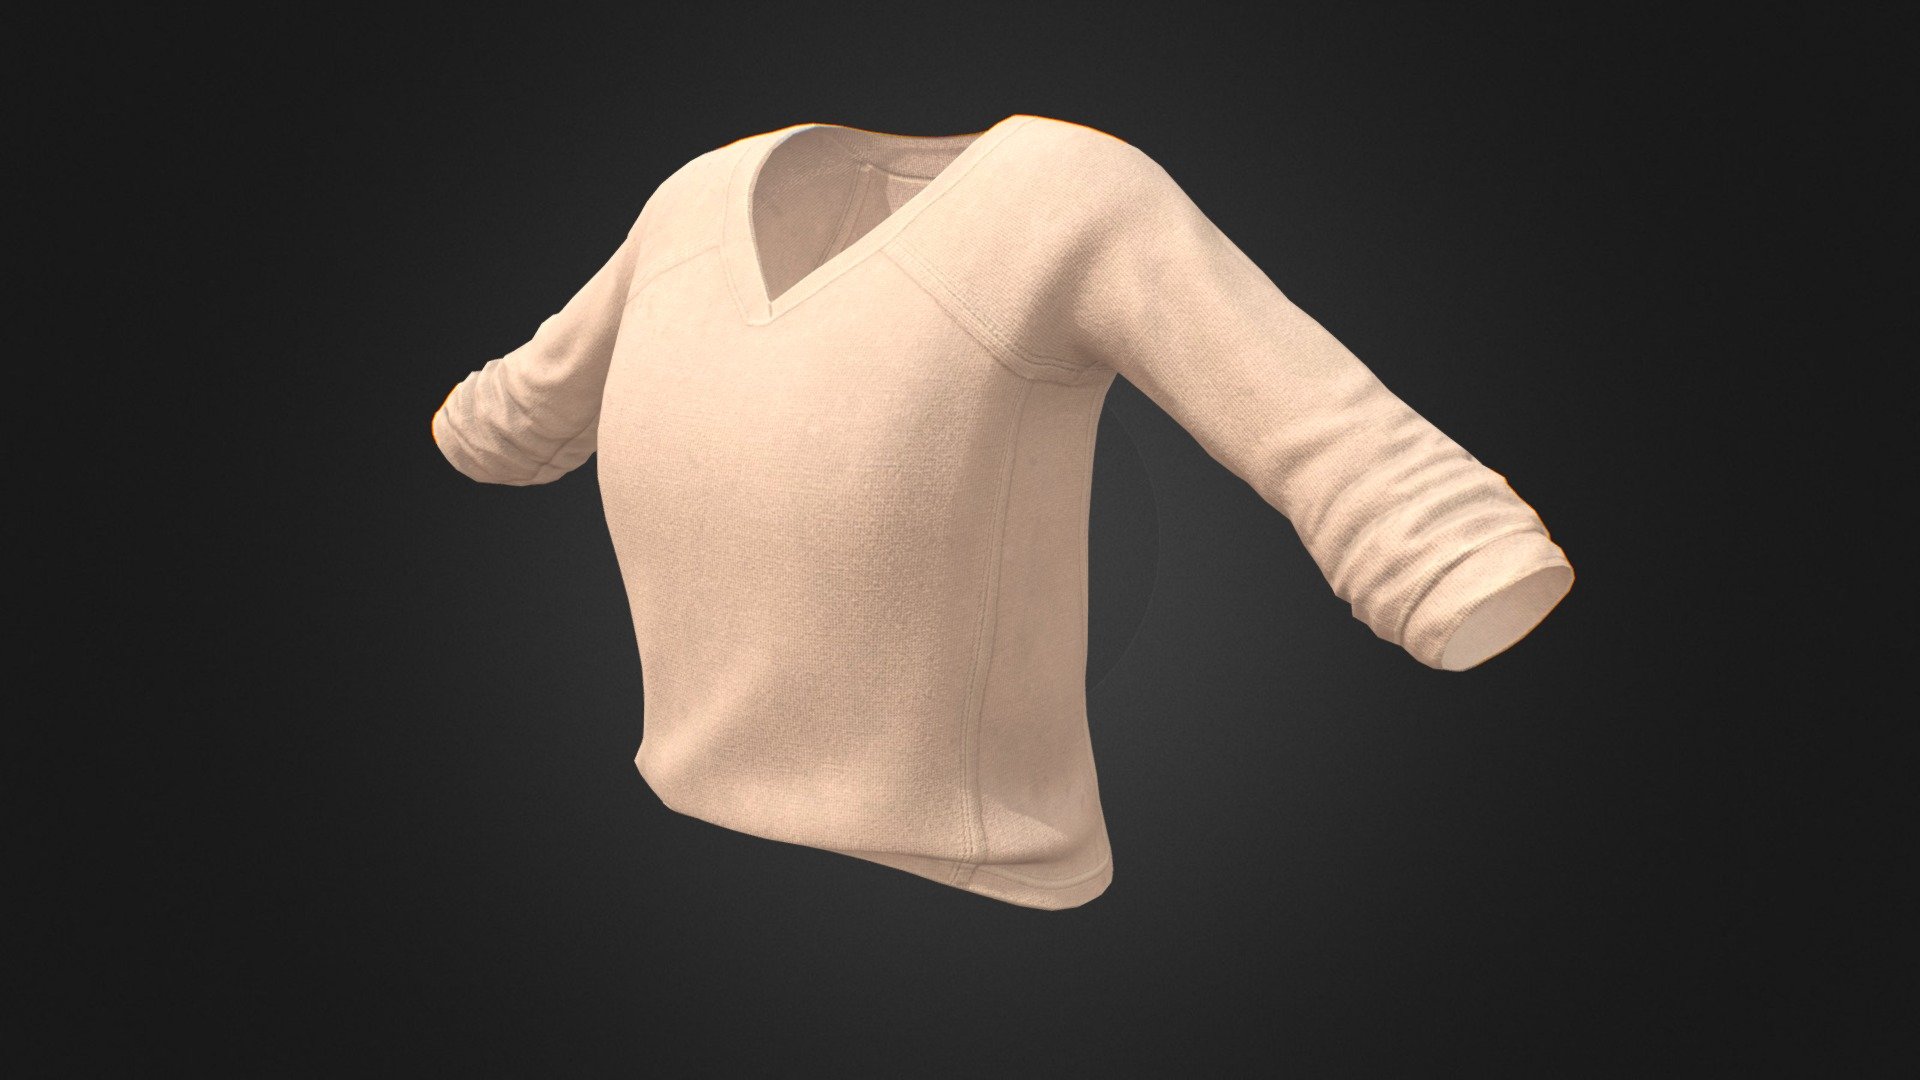 Made to learn cloth sculpting 3d model